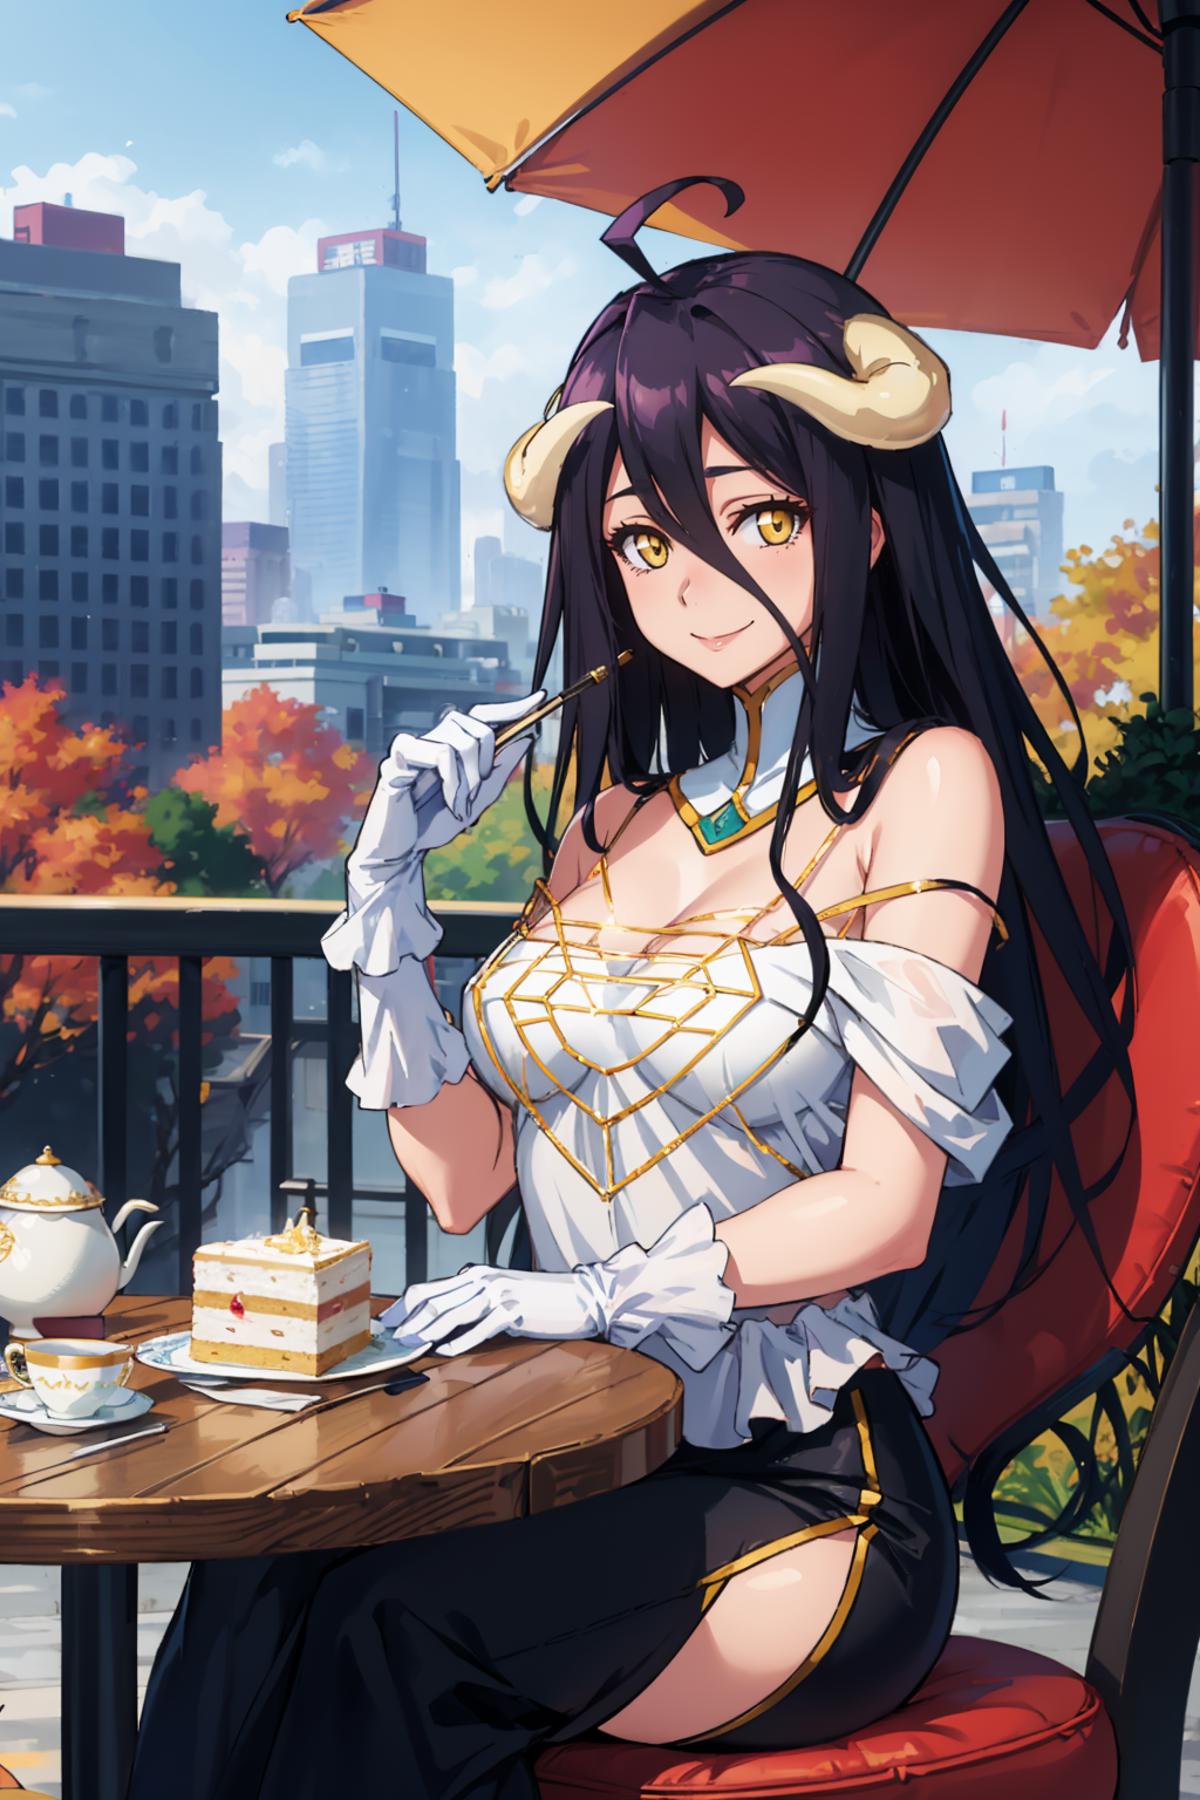 [justTNP] Albedo | Overlord image by novowels